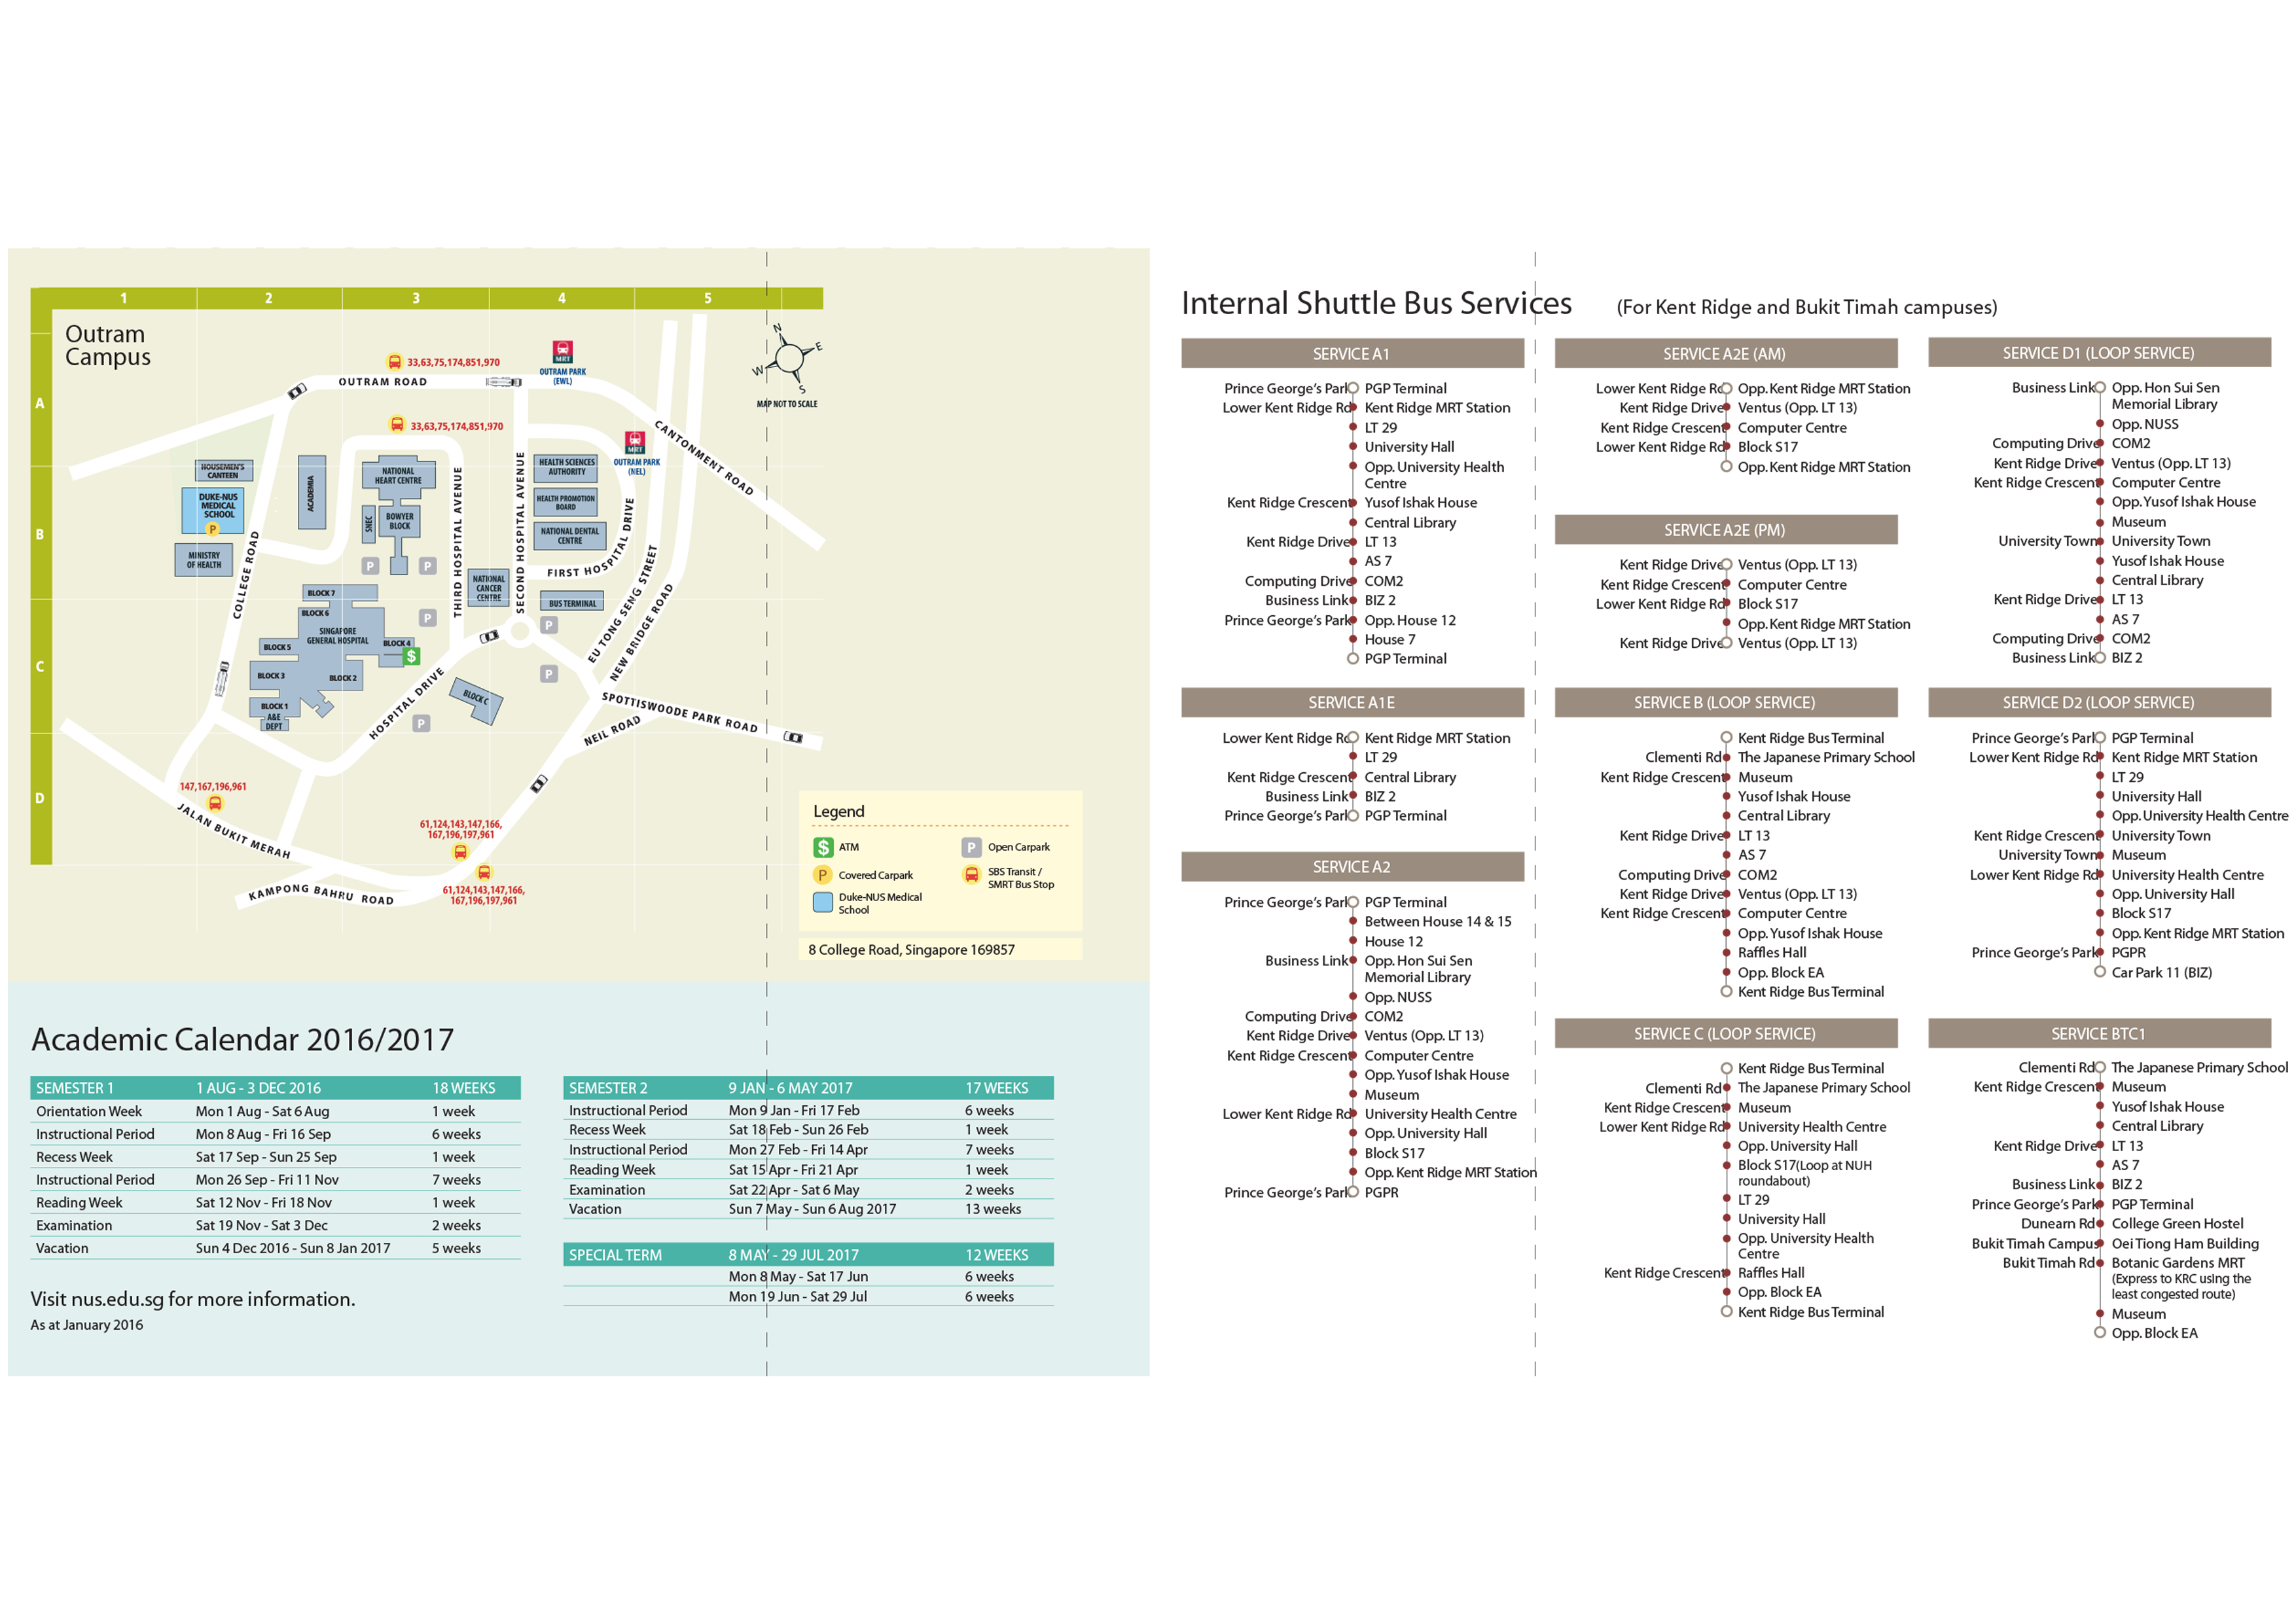 Outram Campus Map